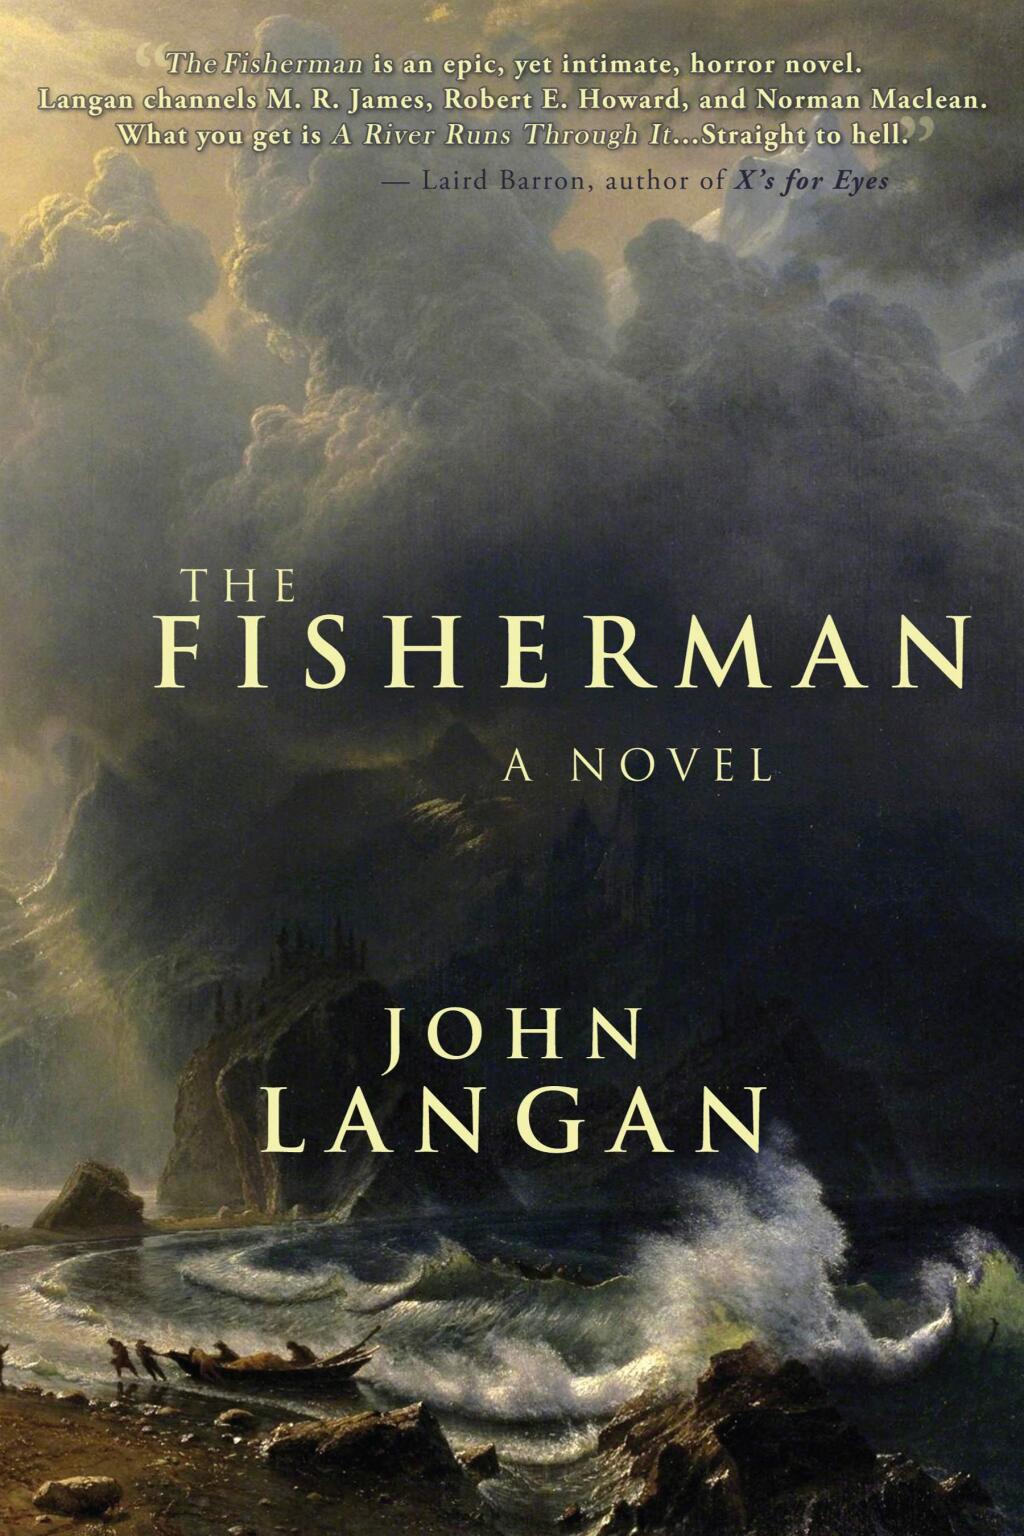 John Langan's “The Fisherman,” published by Word Horde books, was named Novel of the Year by “This is Horror” magazine.